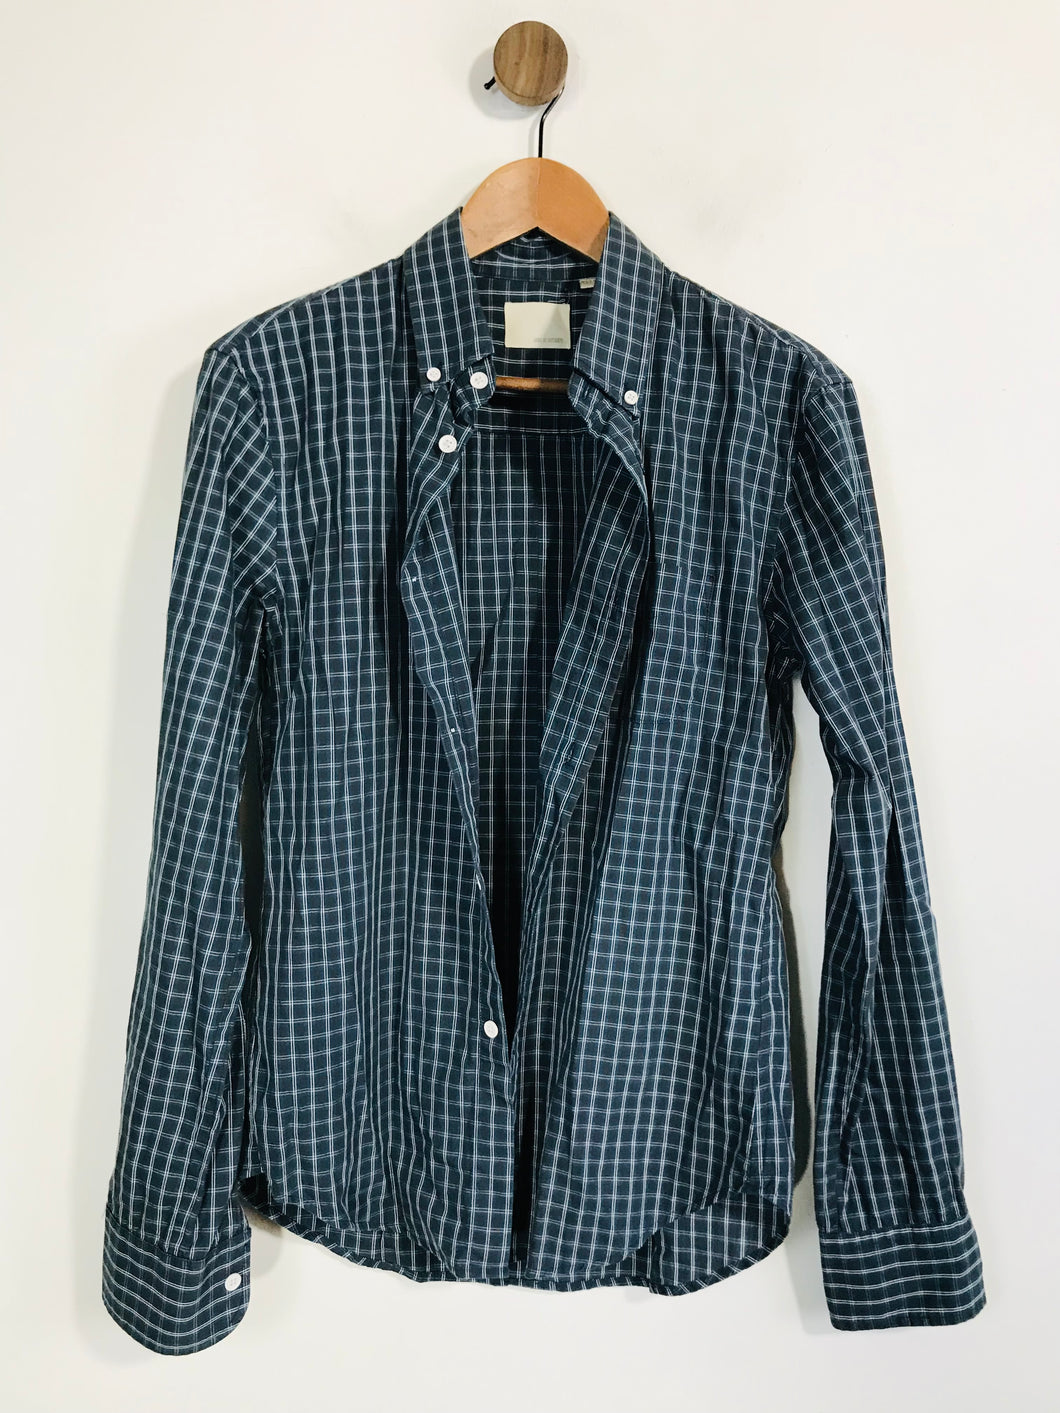 Band of Outsiders Men's Cotton Check Gingham Button-Up Shirt | 1 | Blue